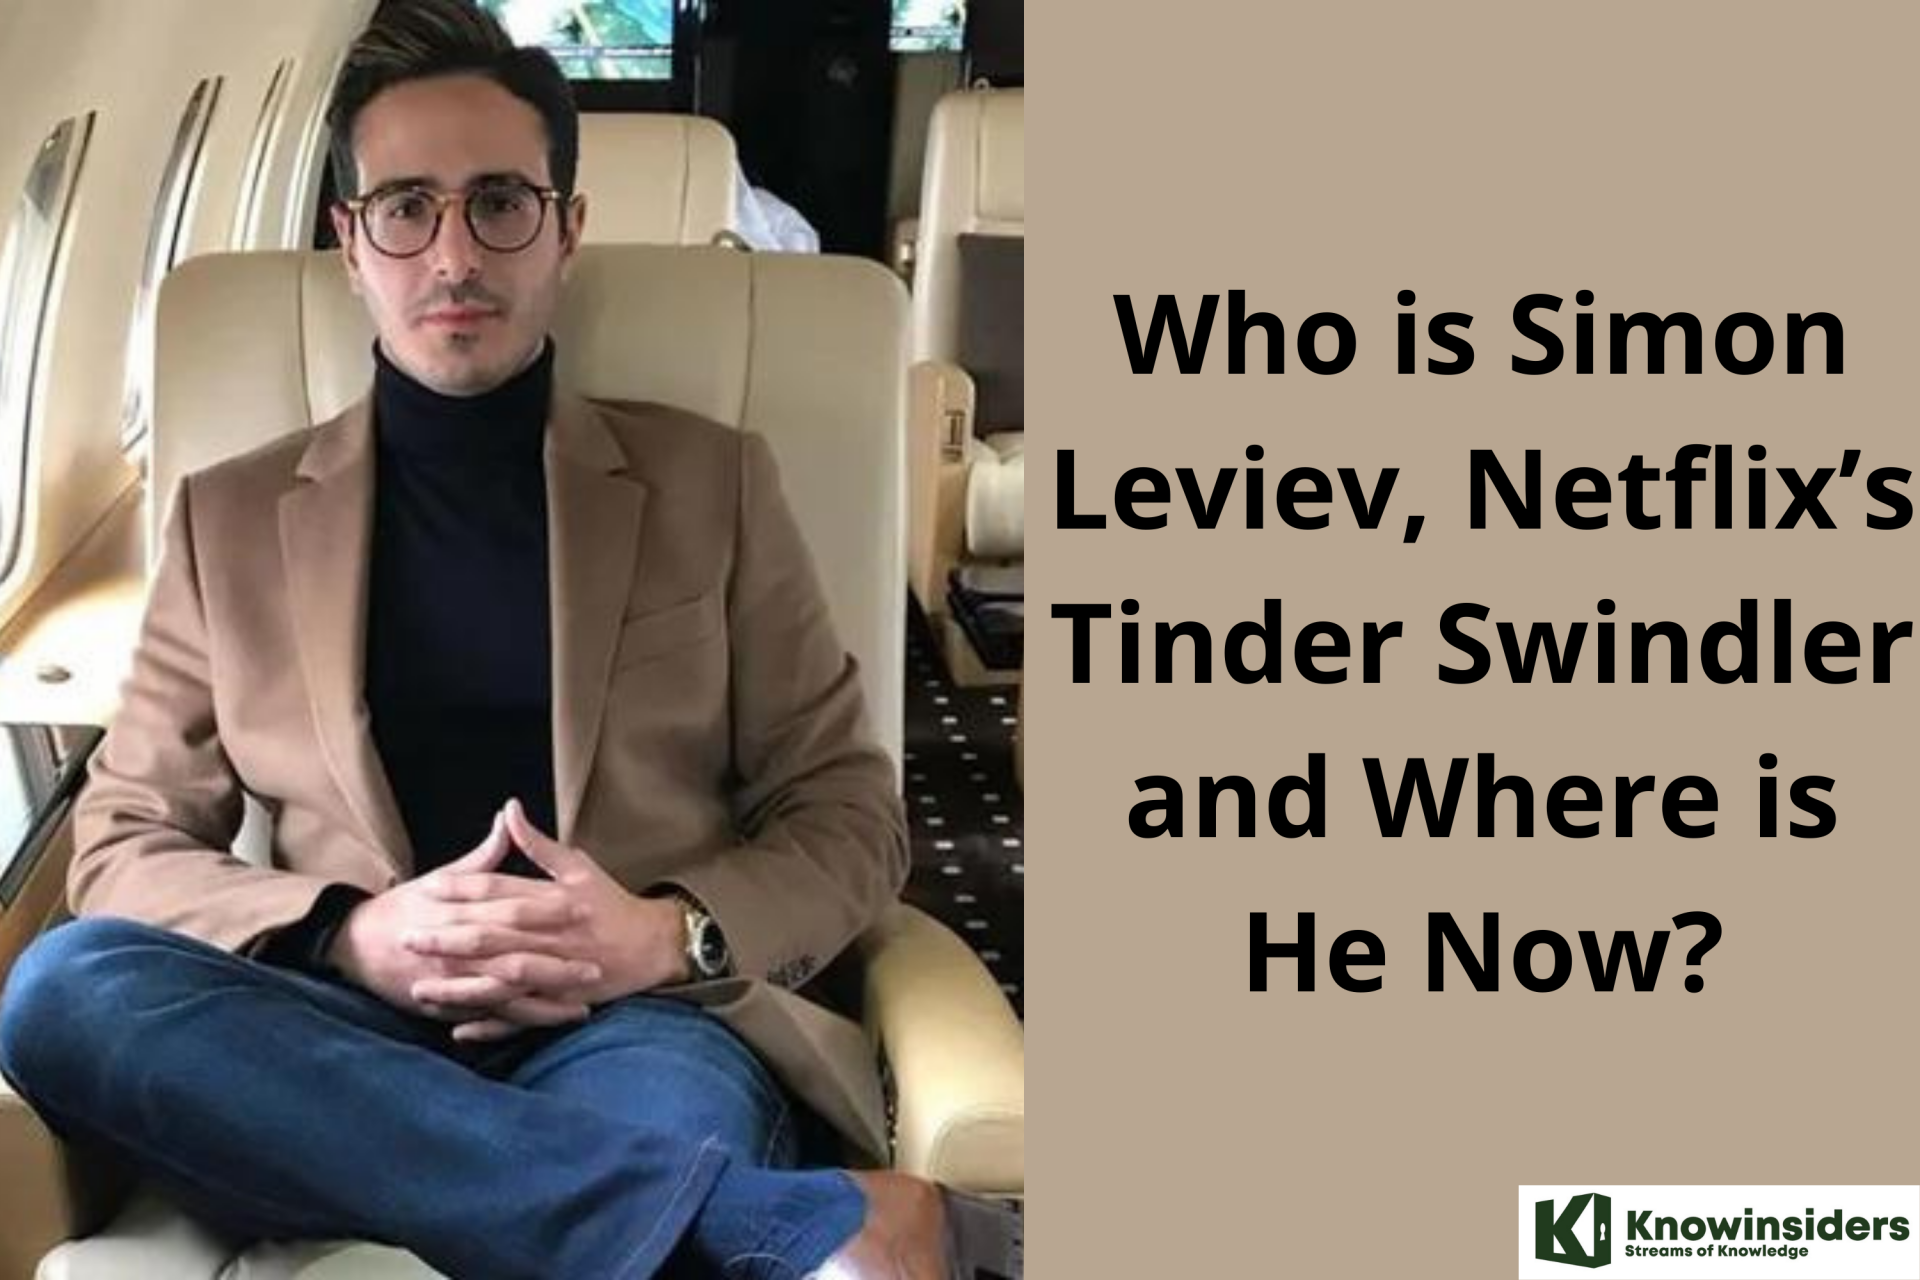 Where is Simon Leviev, Netflix’s Tinder Swindler and What He Doing Now?